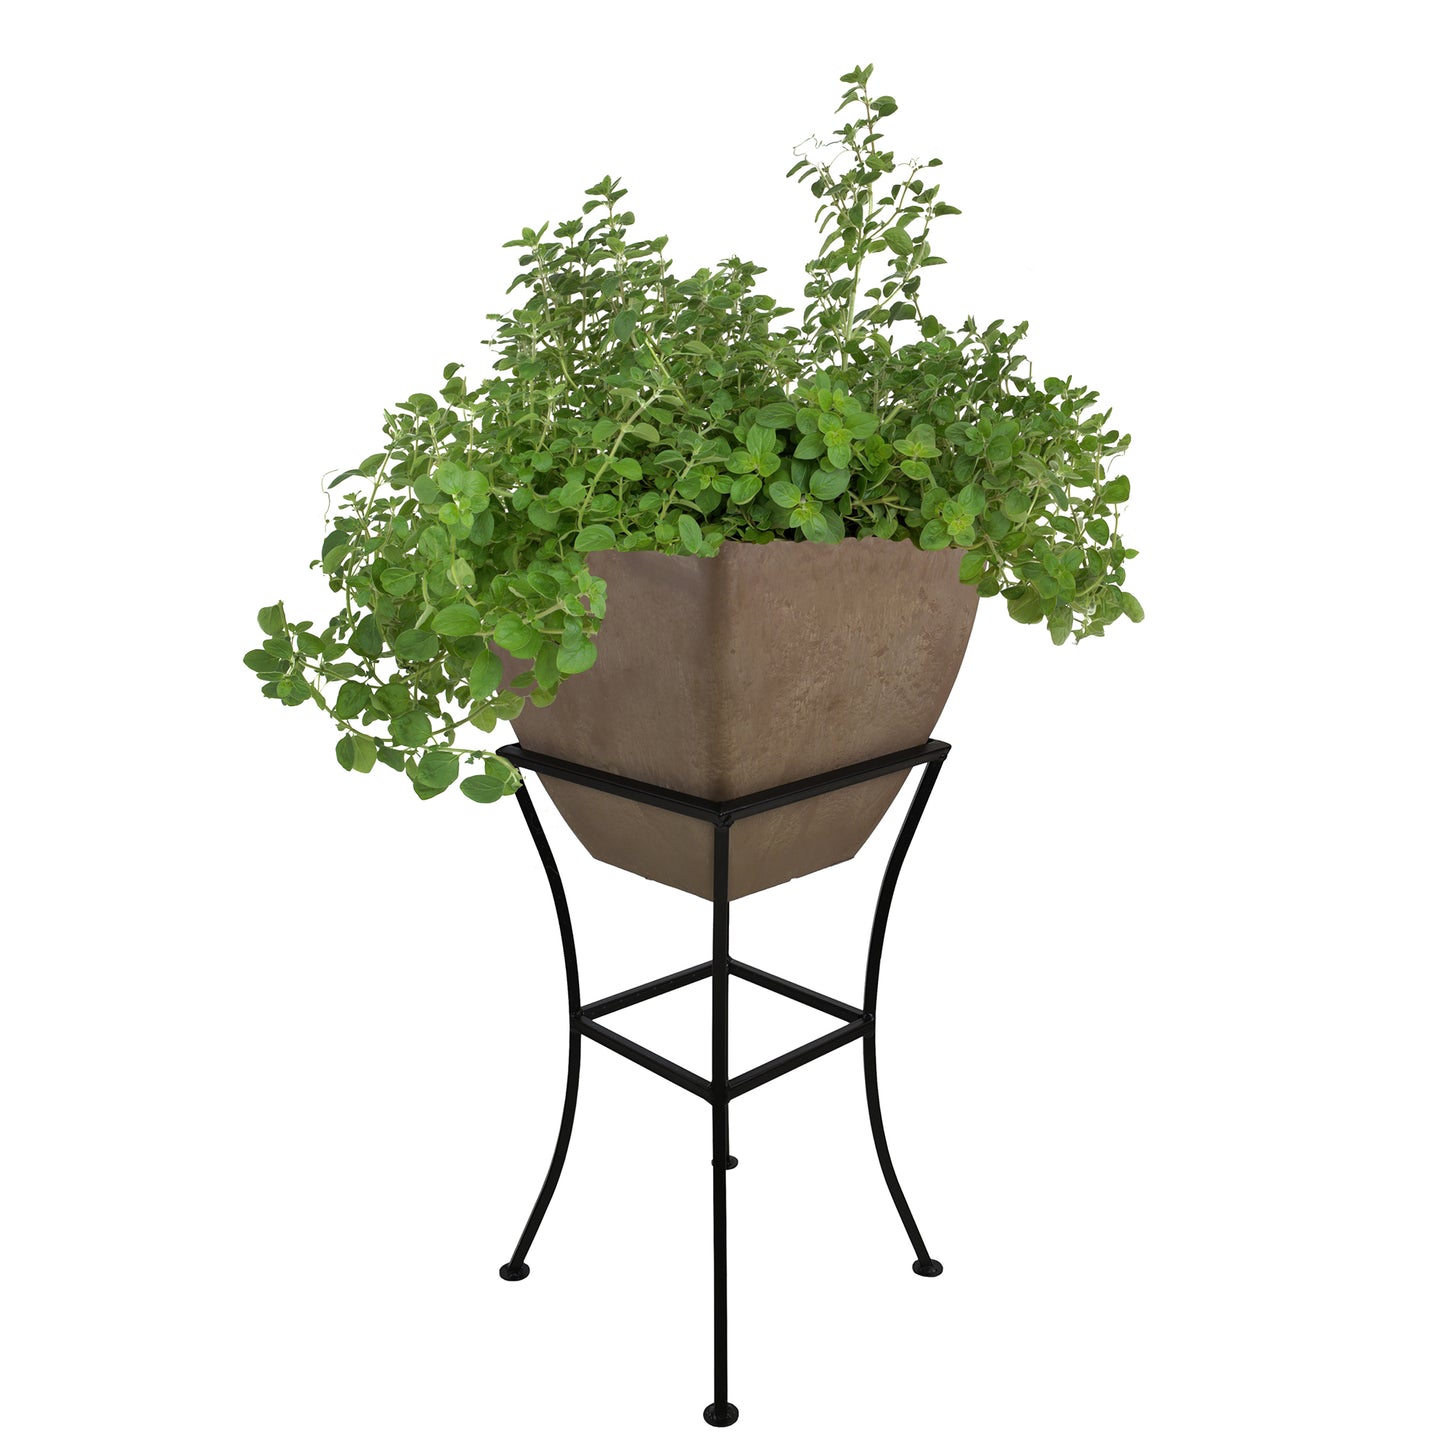 12" Square Garden Planter with Wrought Iron Stand Oak alt 1